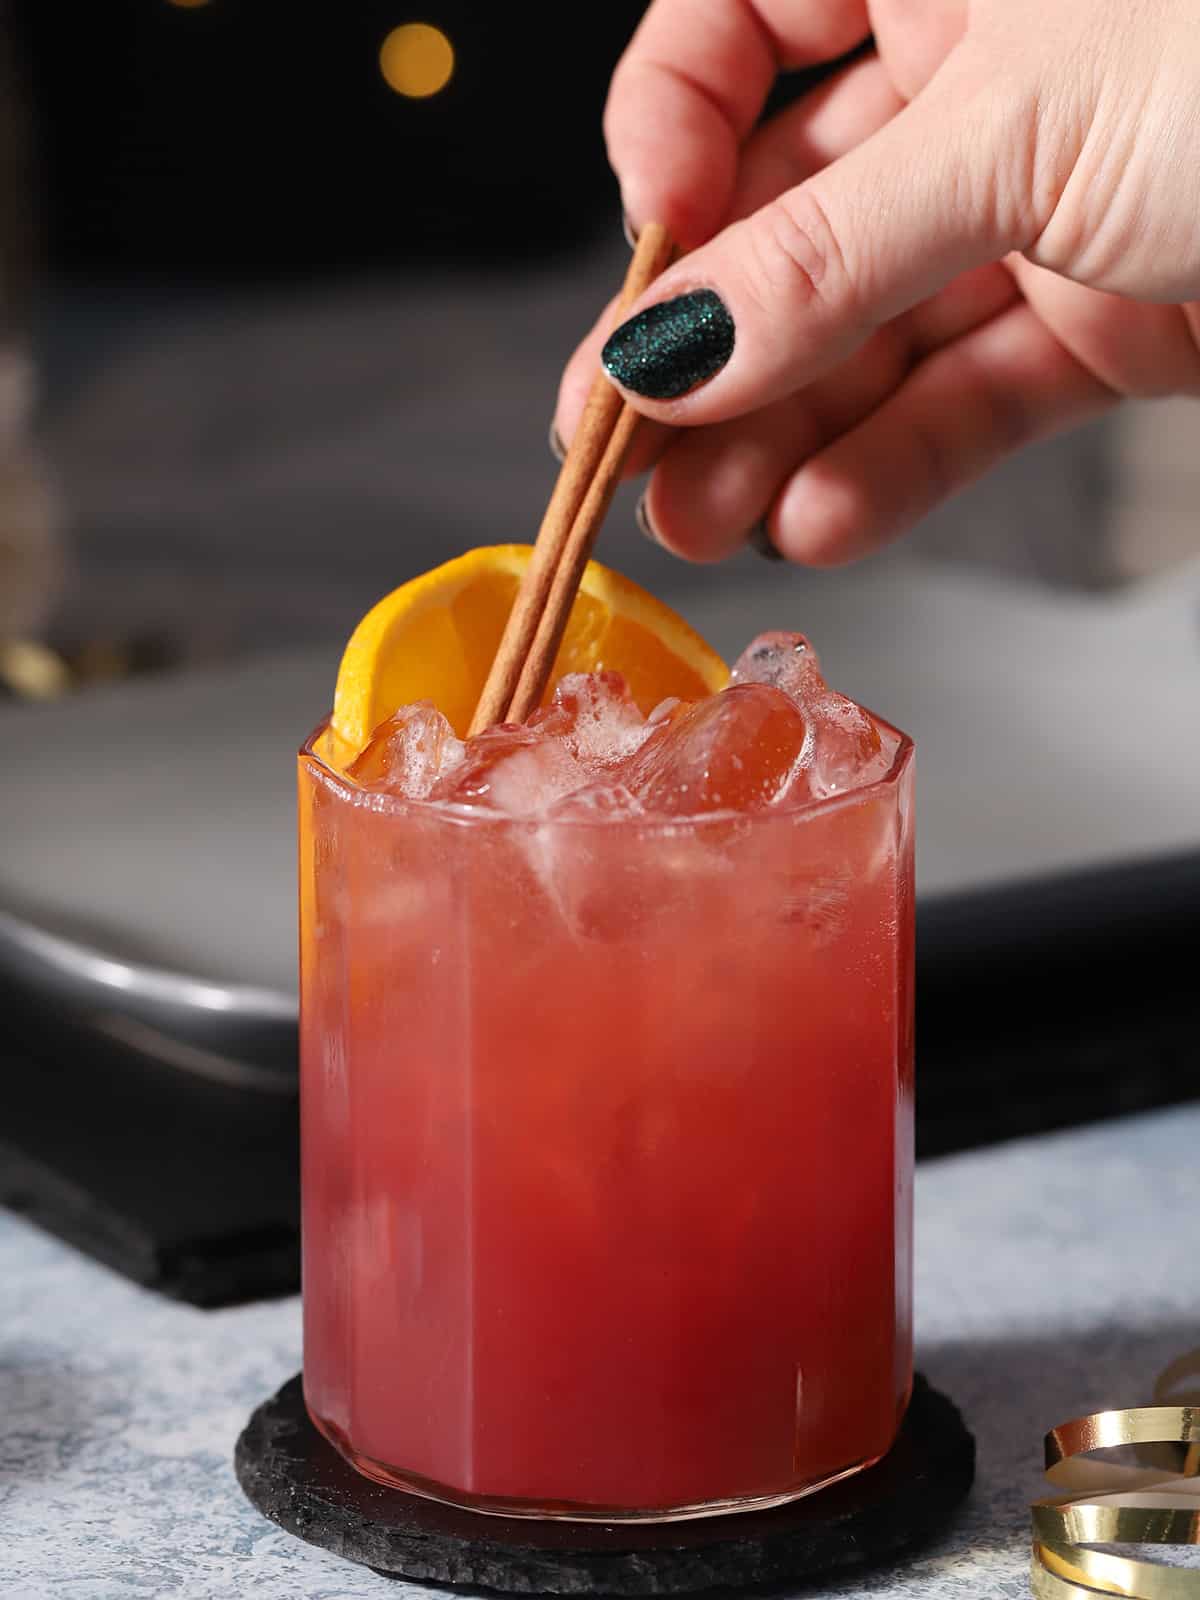 A hand garnishing a glass of cherry holiday mocktail garnished with orange slices and cinnamon sticks.